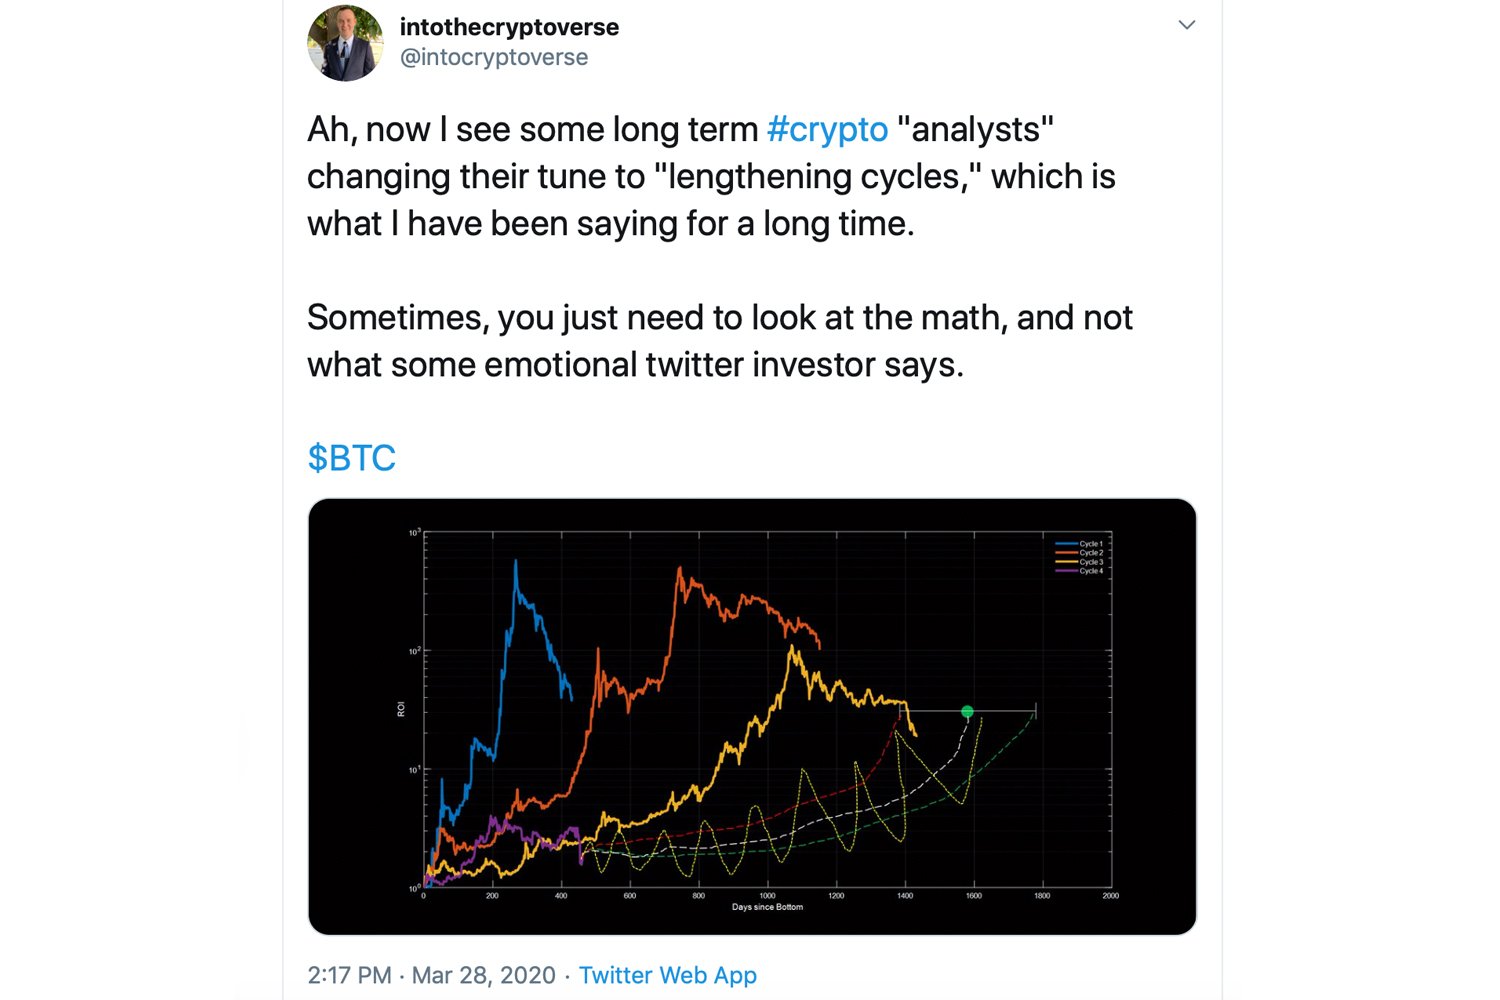 In-Between Bitcoin Halvings: Analyst Proves Bitcoin's Price Not Bound to 4-Year Cycles